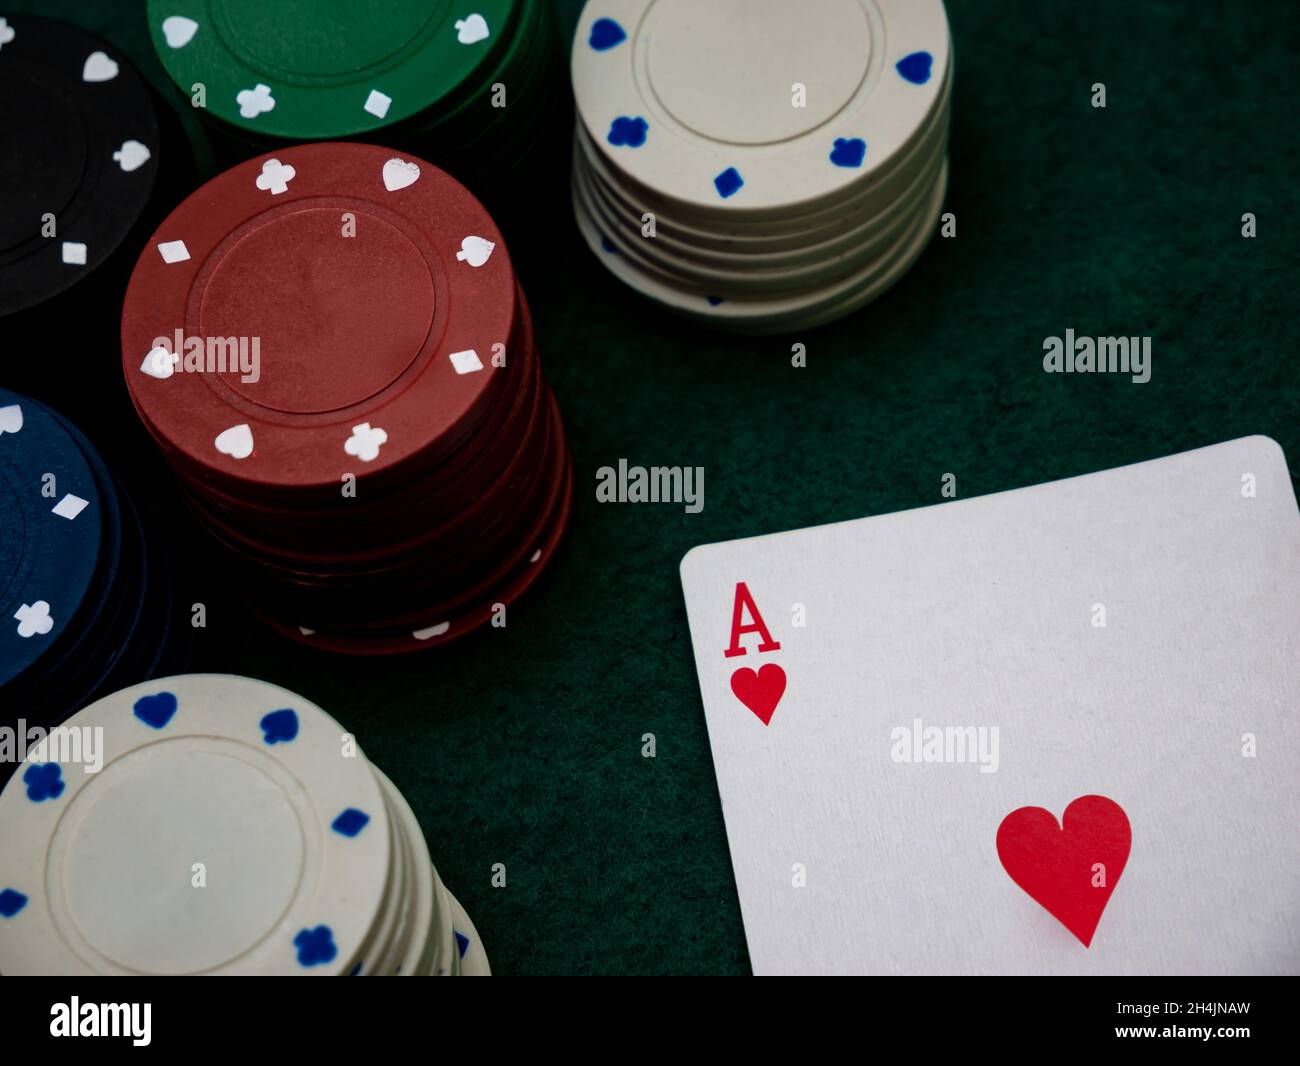 poker game table, single ace card score with stack of playing chips Stock Photo